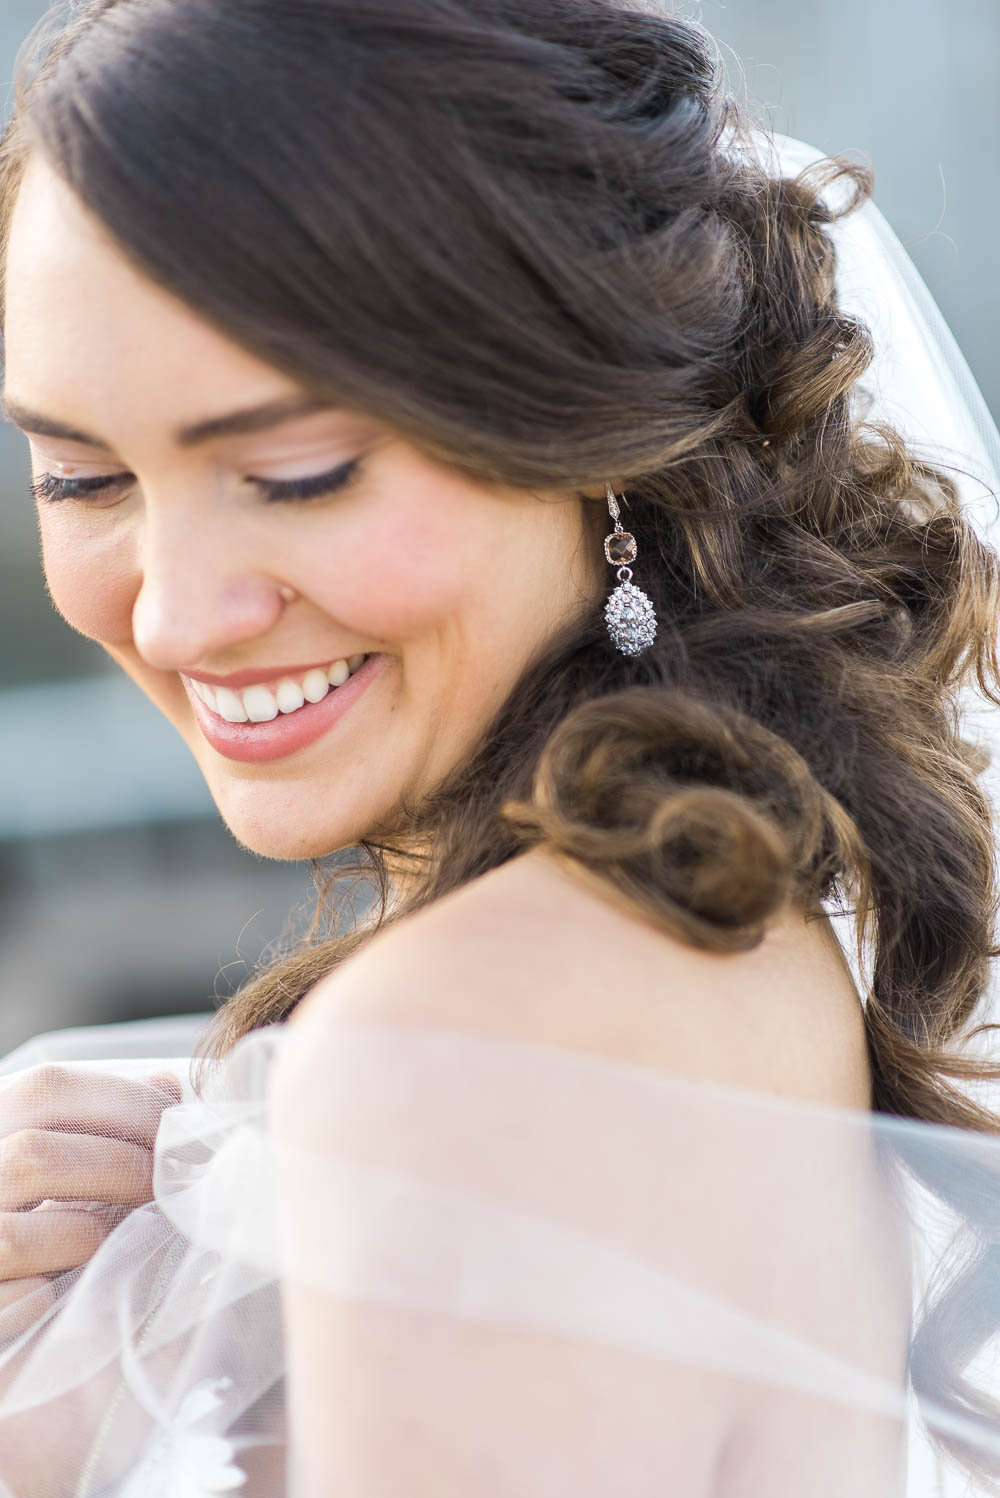 Tips for finding the perfect Bridal Makeup Artist!